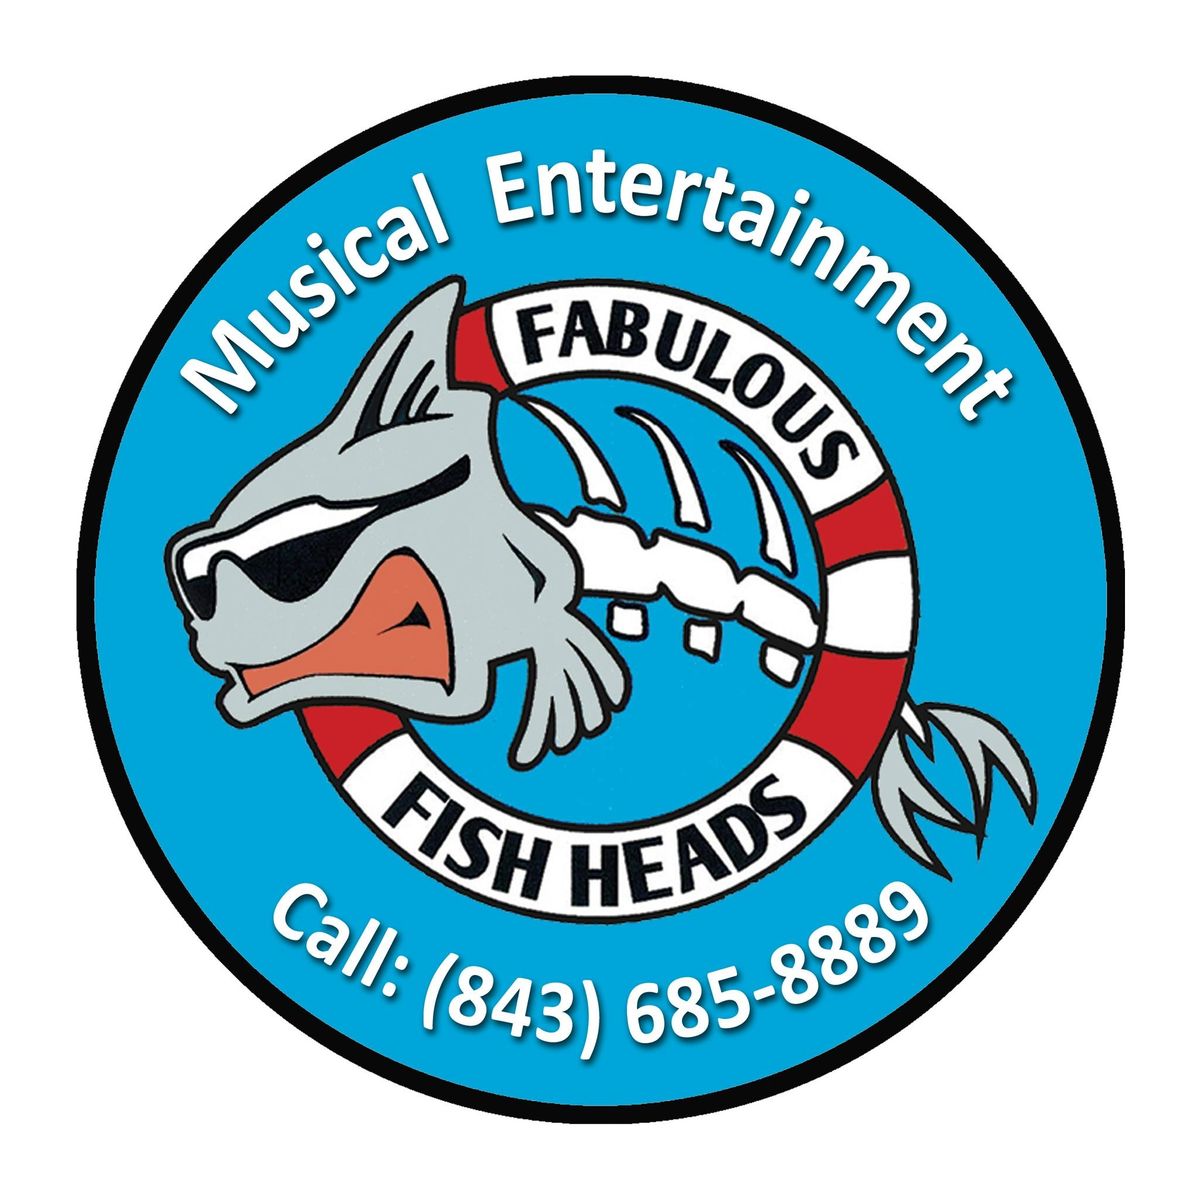 Friday Night Summer Concert Series - Fabulous Fishheads Band